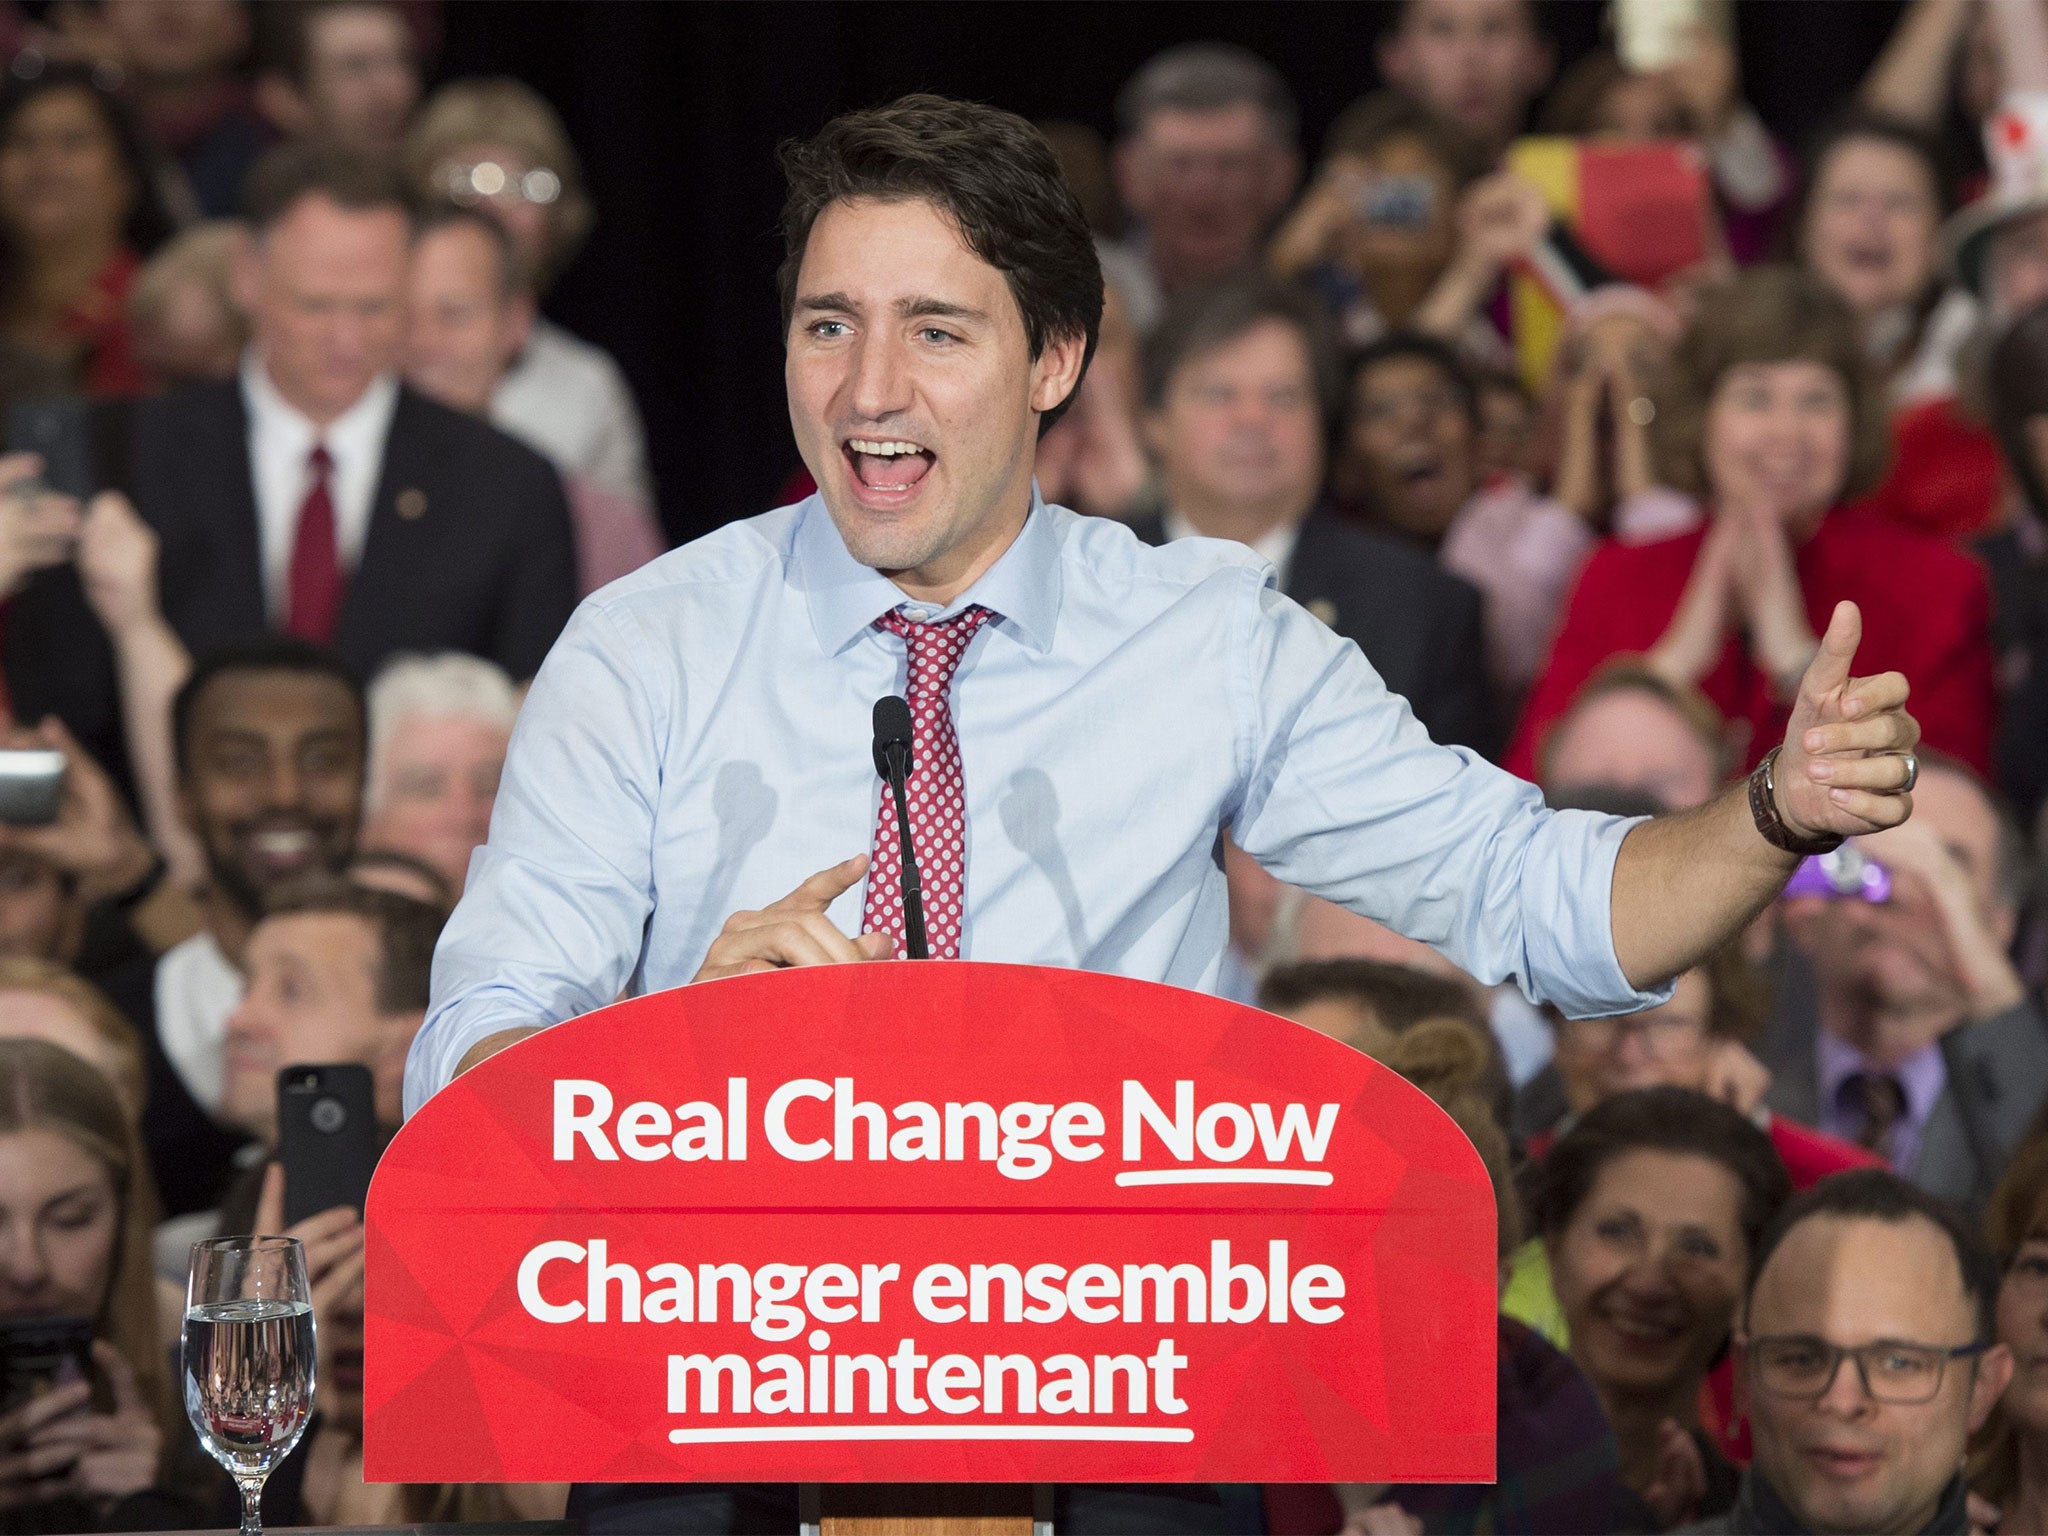 Justin Trudeau's victory marked an end to Stephen Harper's near-decade in power